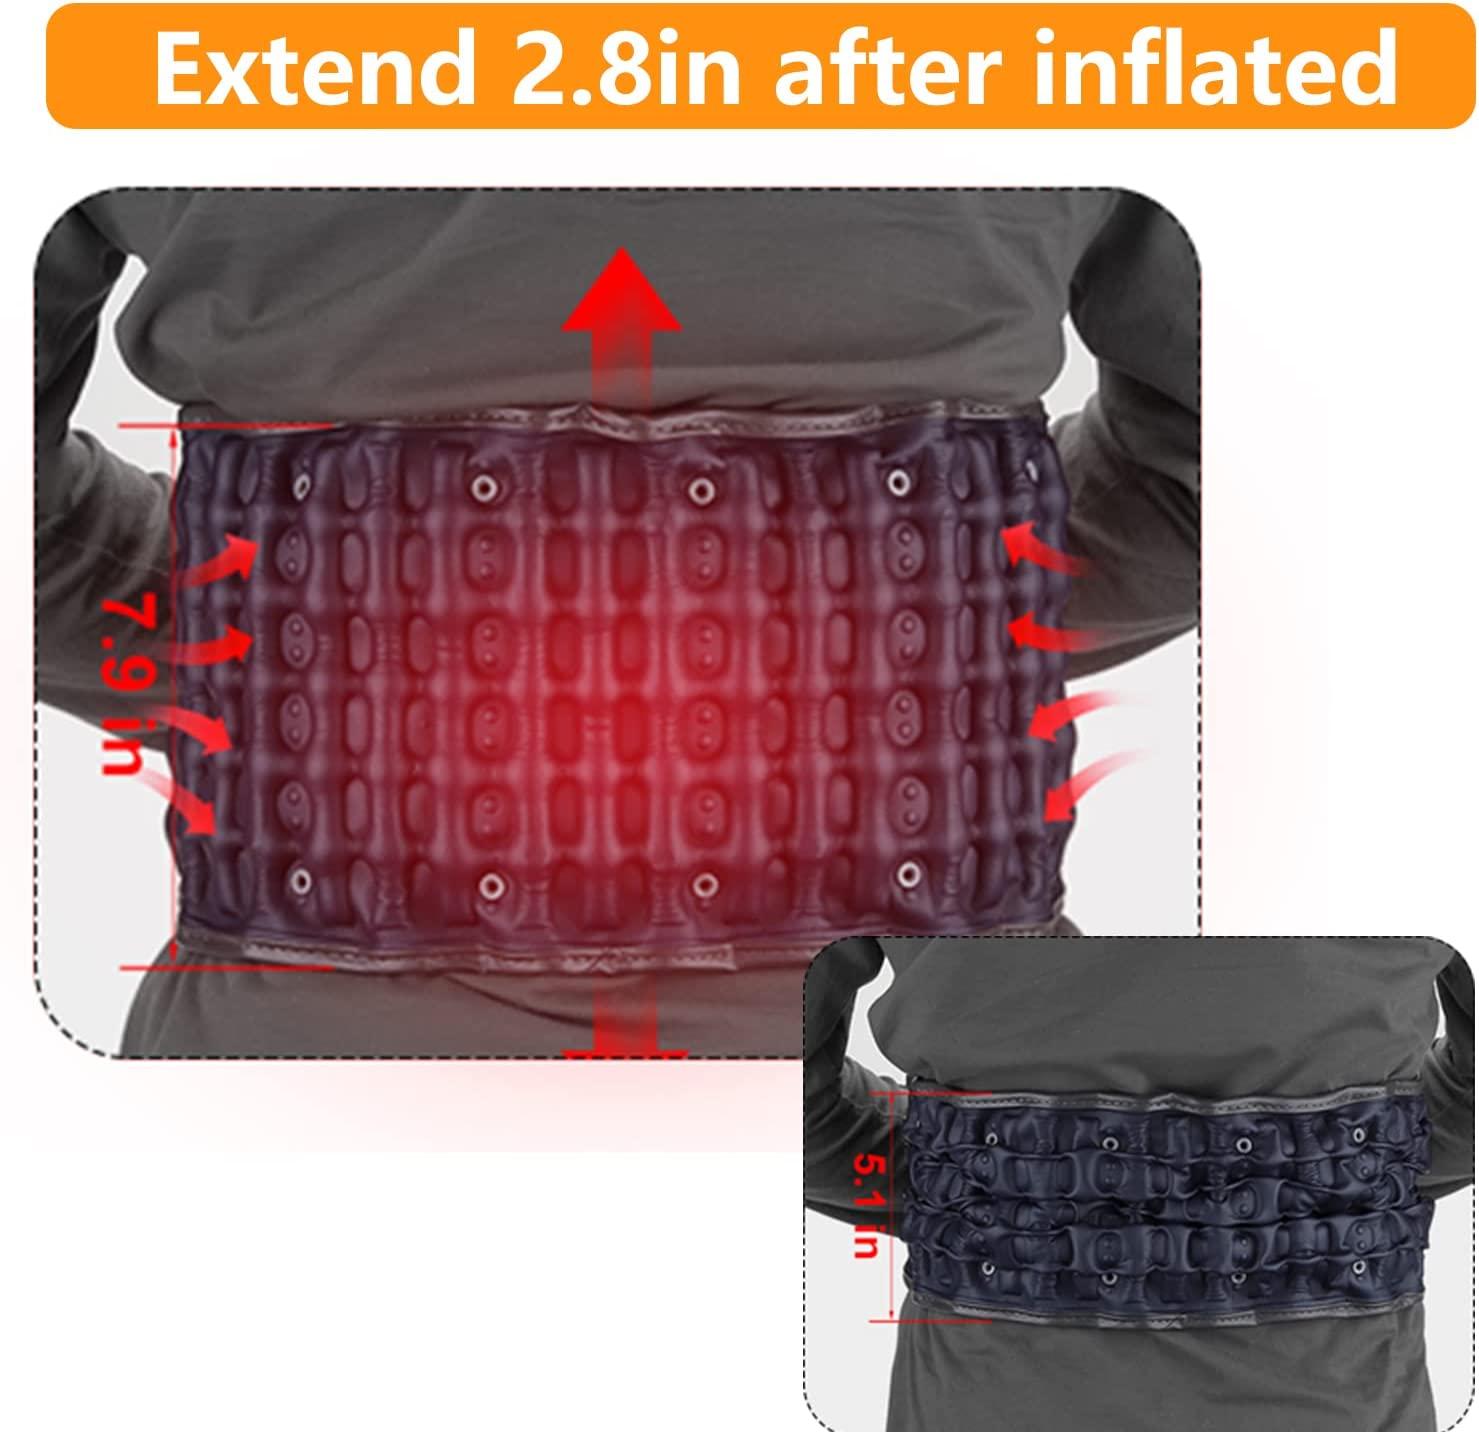 Self Heating Lower Back Support – Dynergy